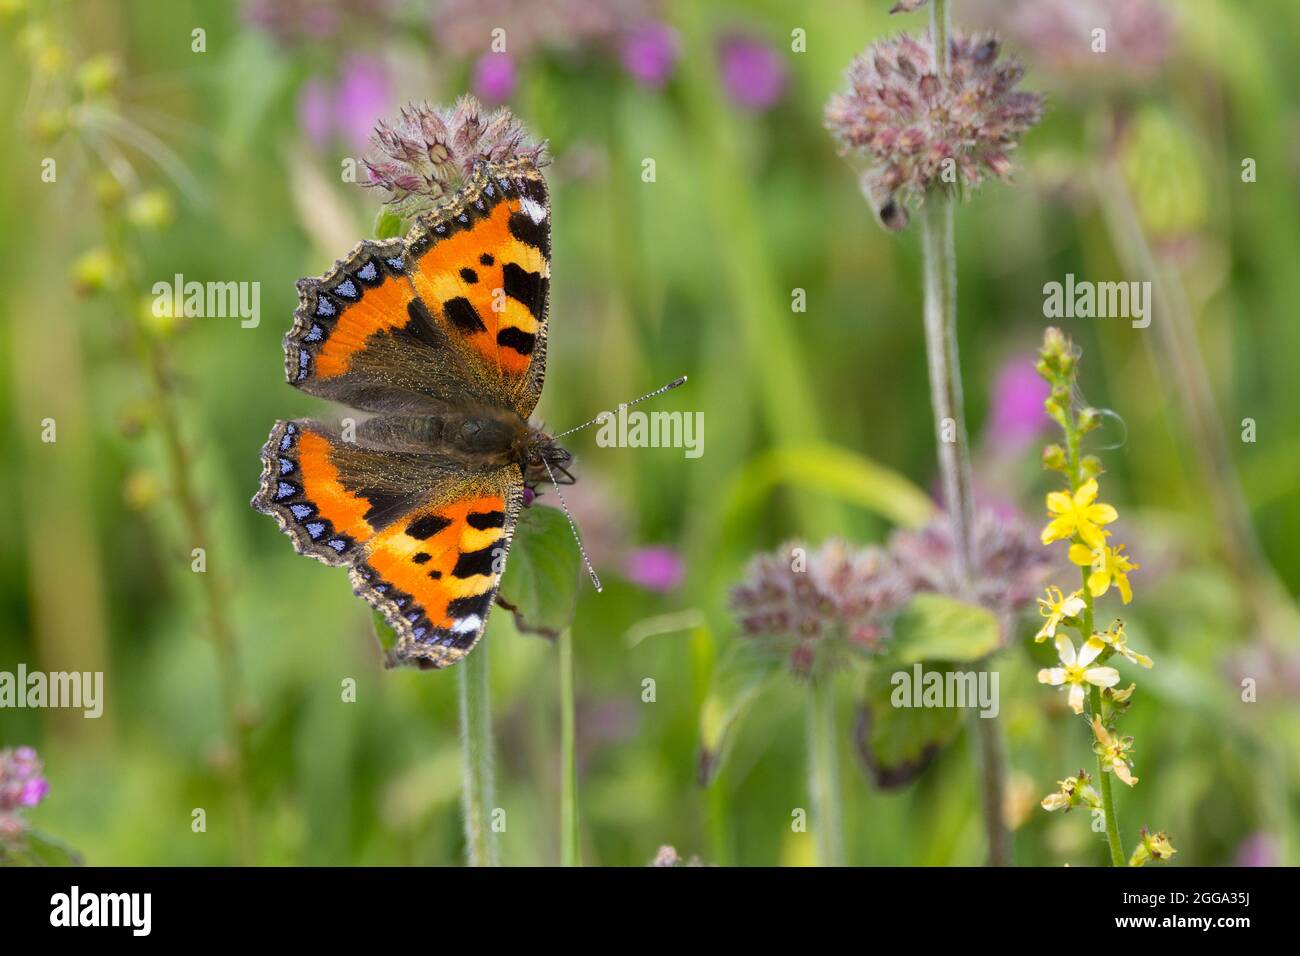 Small tortoiseshell butterfly (Aglais urticae) upperwings marbled orange yellow and black with blue half moons on rear edges smoky  brown underwings Stock Photo